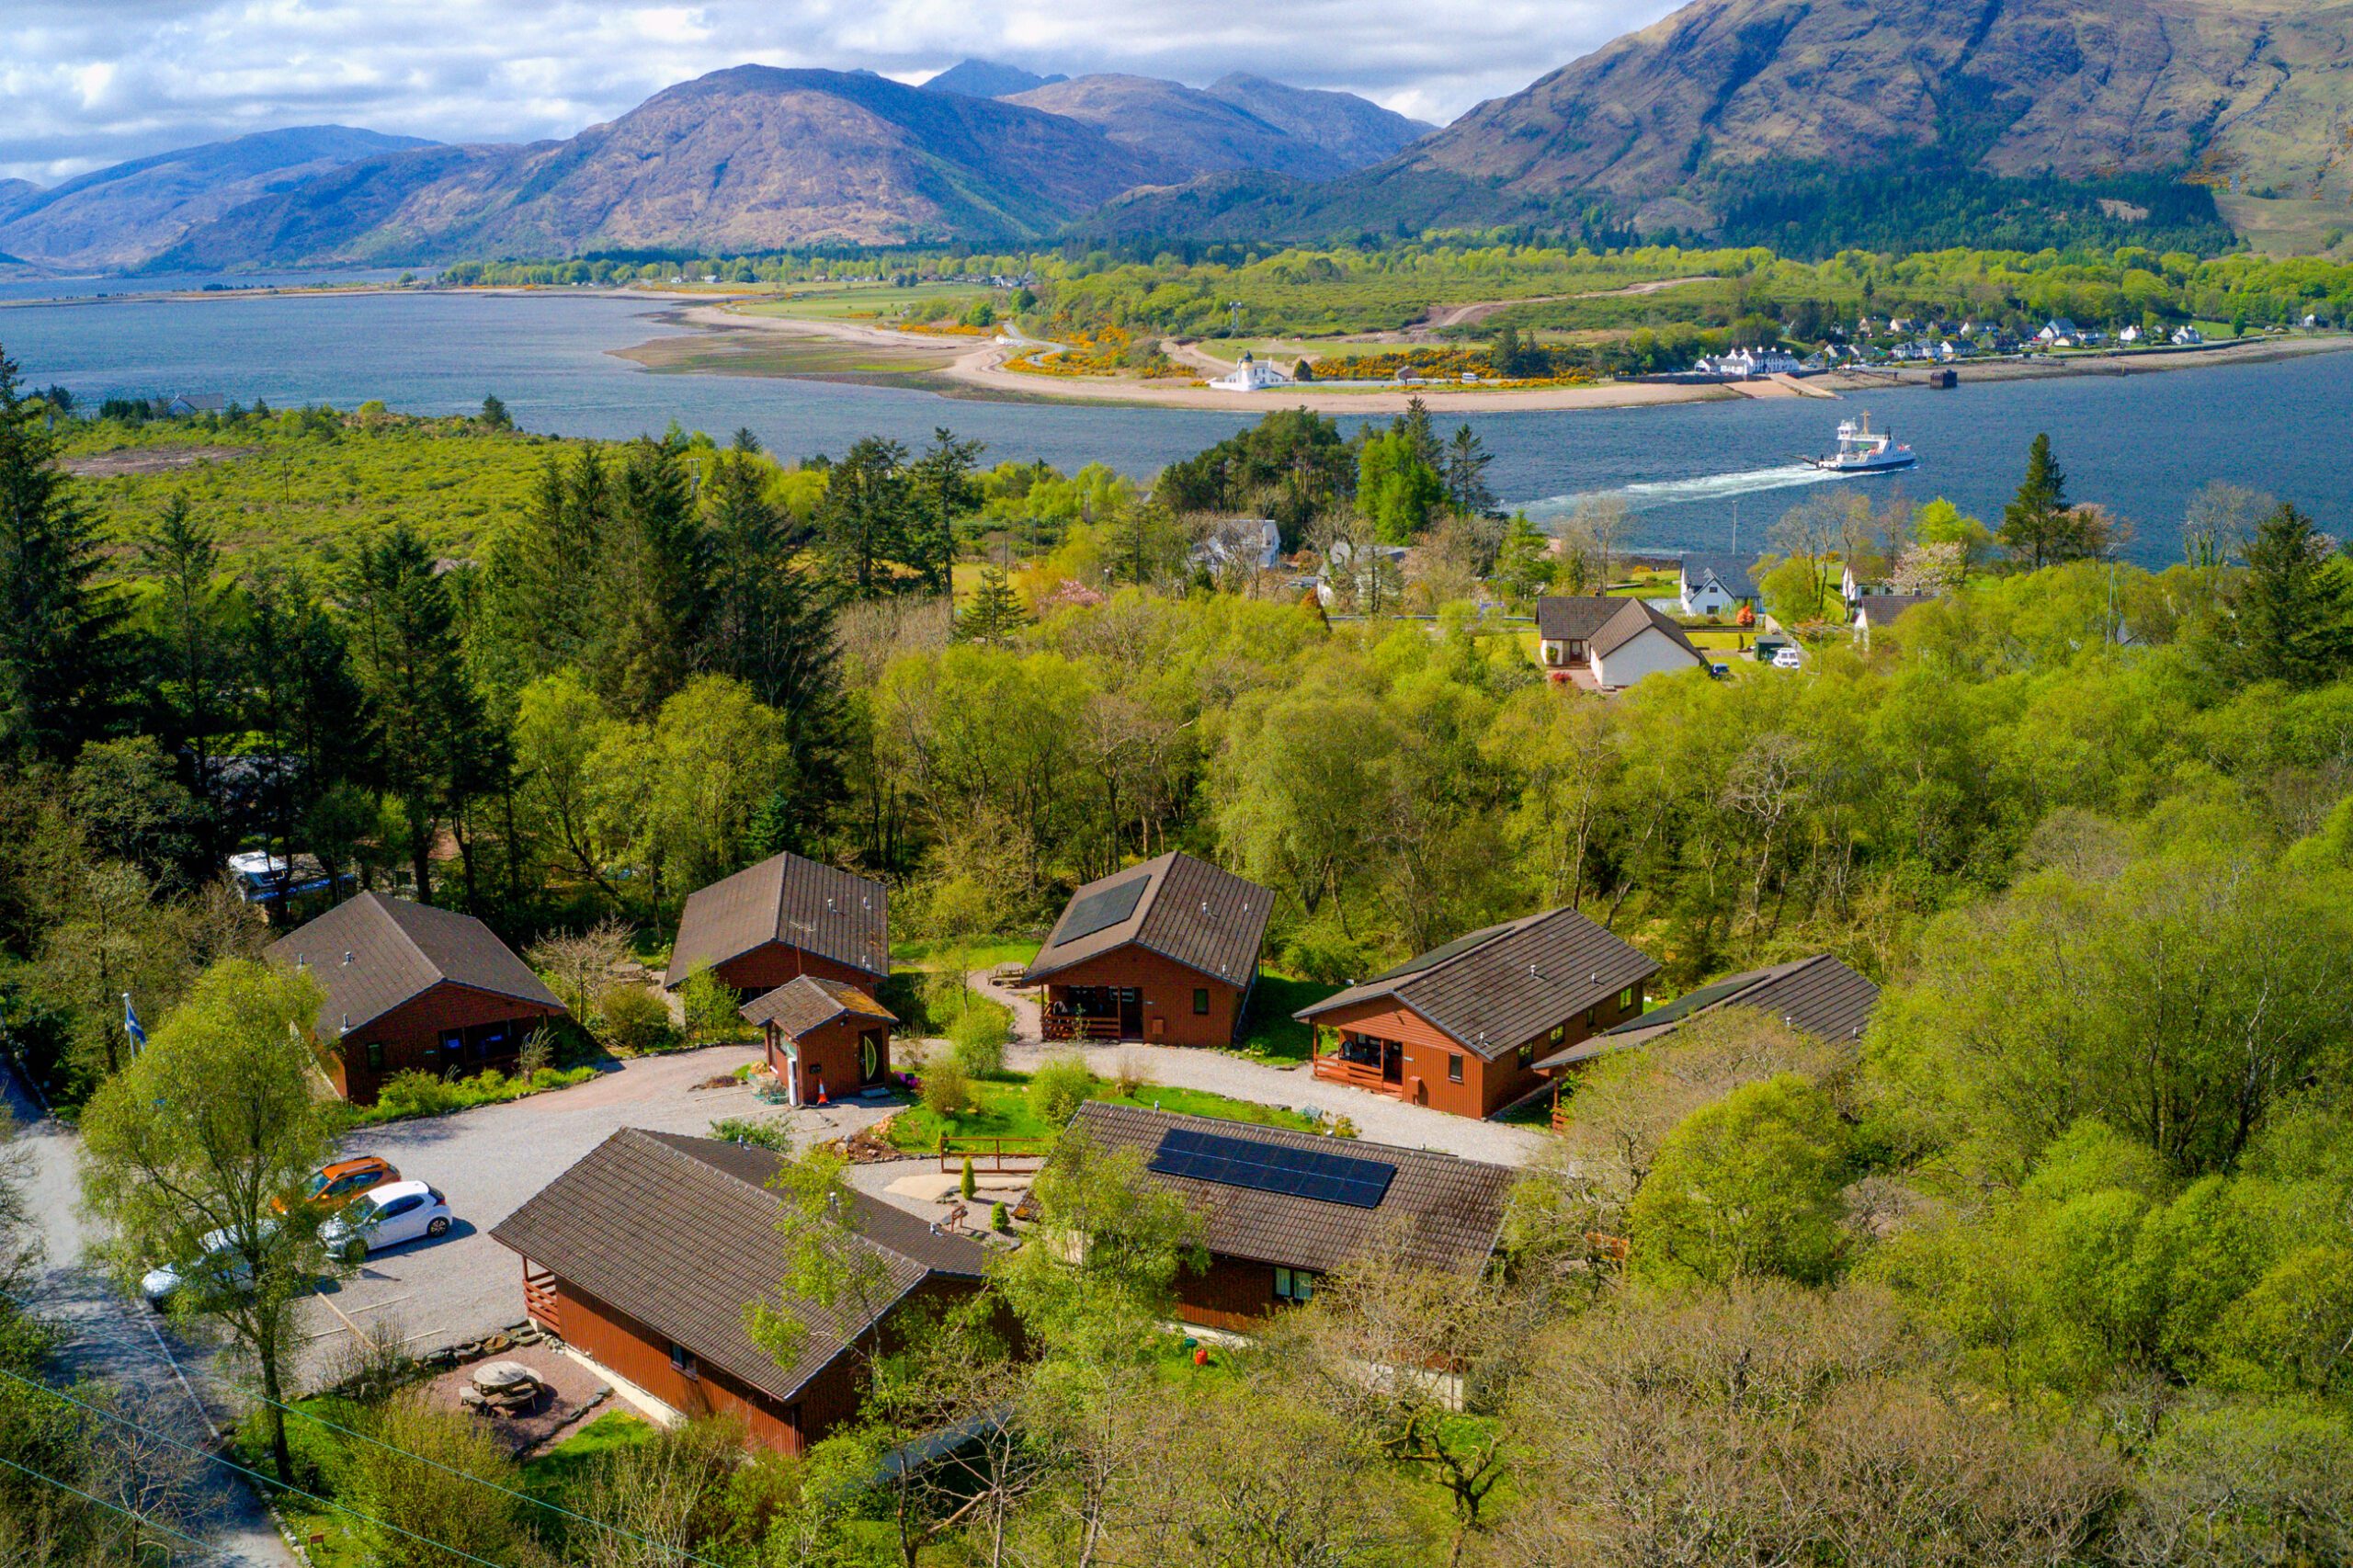 The view looking down on Birchbrae Highland Lodges overlooking the Corran Ferry & Corran Narrows on Loch Linnhe.